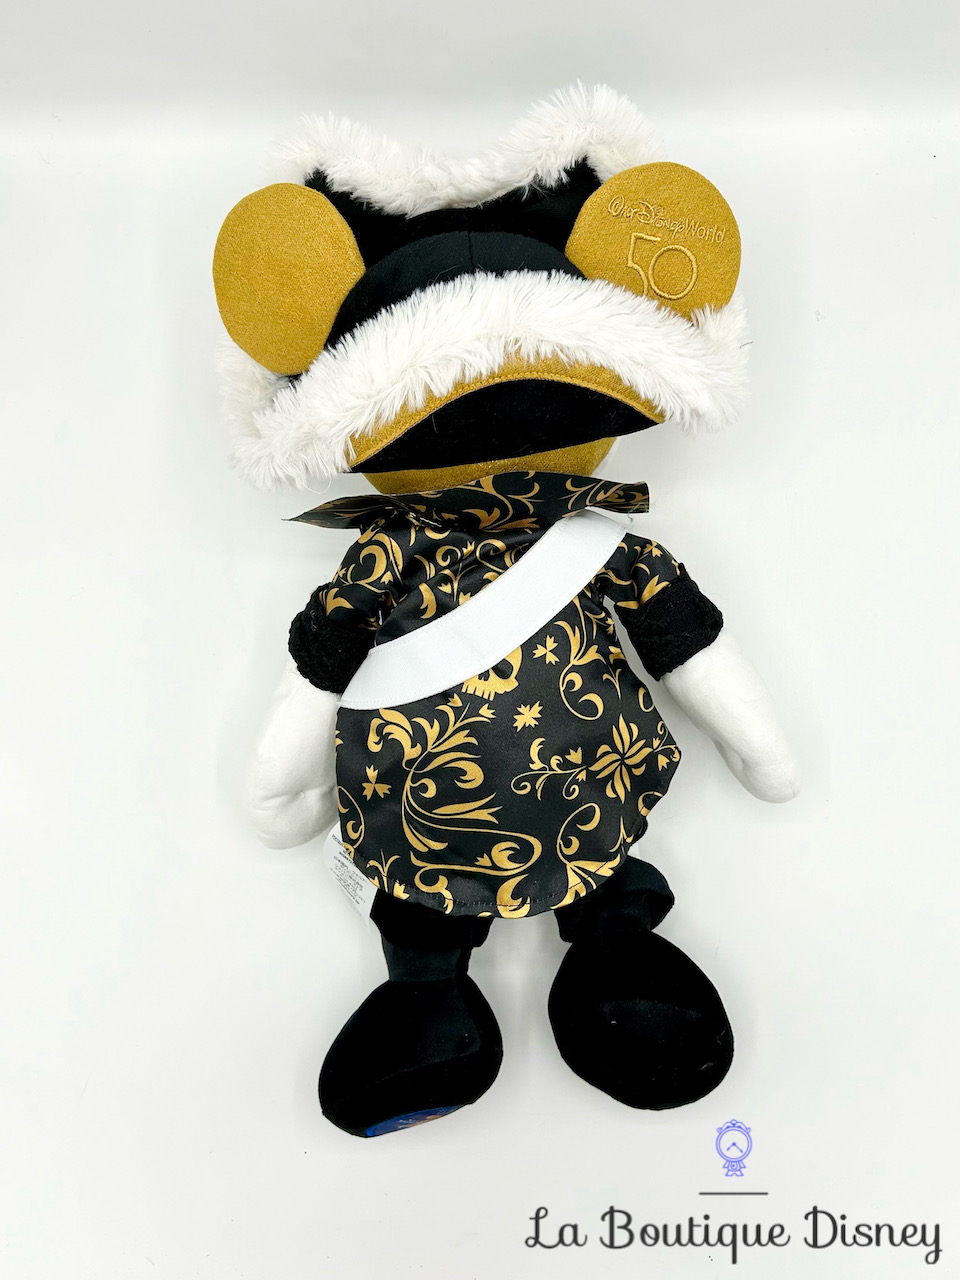 peluche-mickey-mouse-main-attraction-2-12-pirates-of-the-caribbean-disney-store-édition-limitée-4